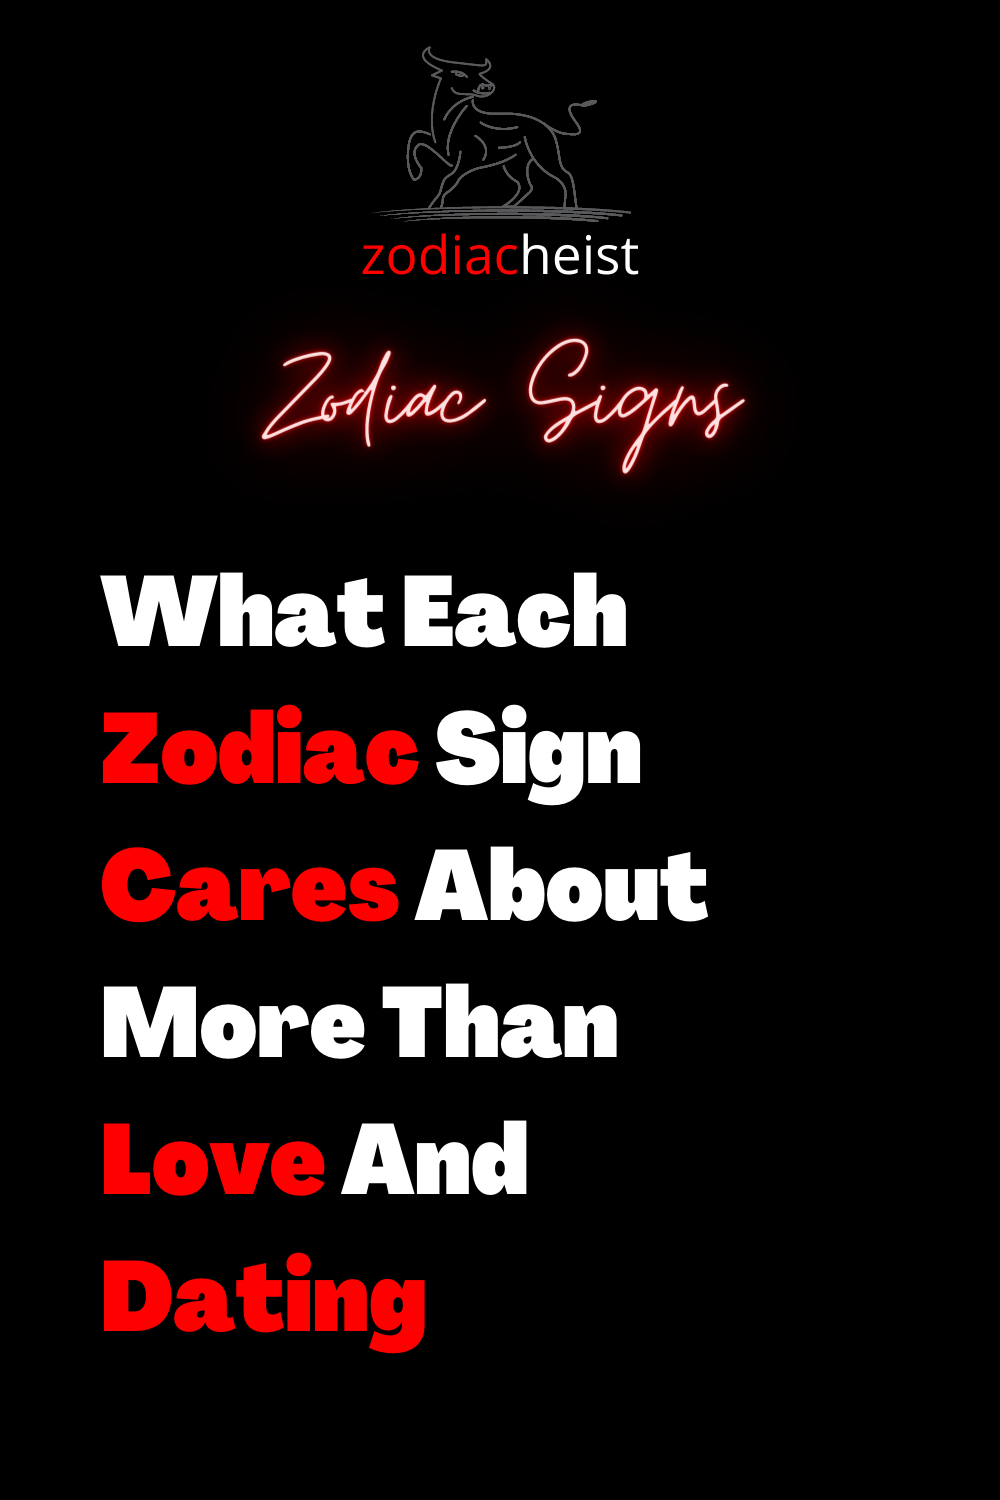 What Each Zodiac Sign Cares About More Than Love And Dating